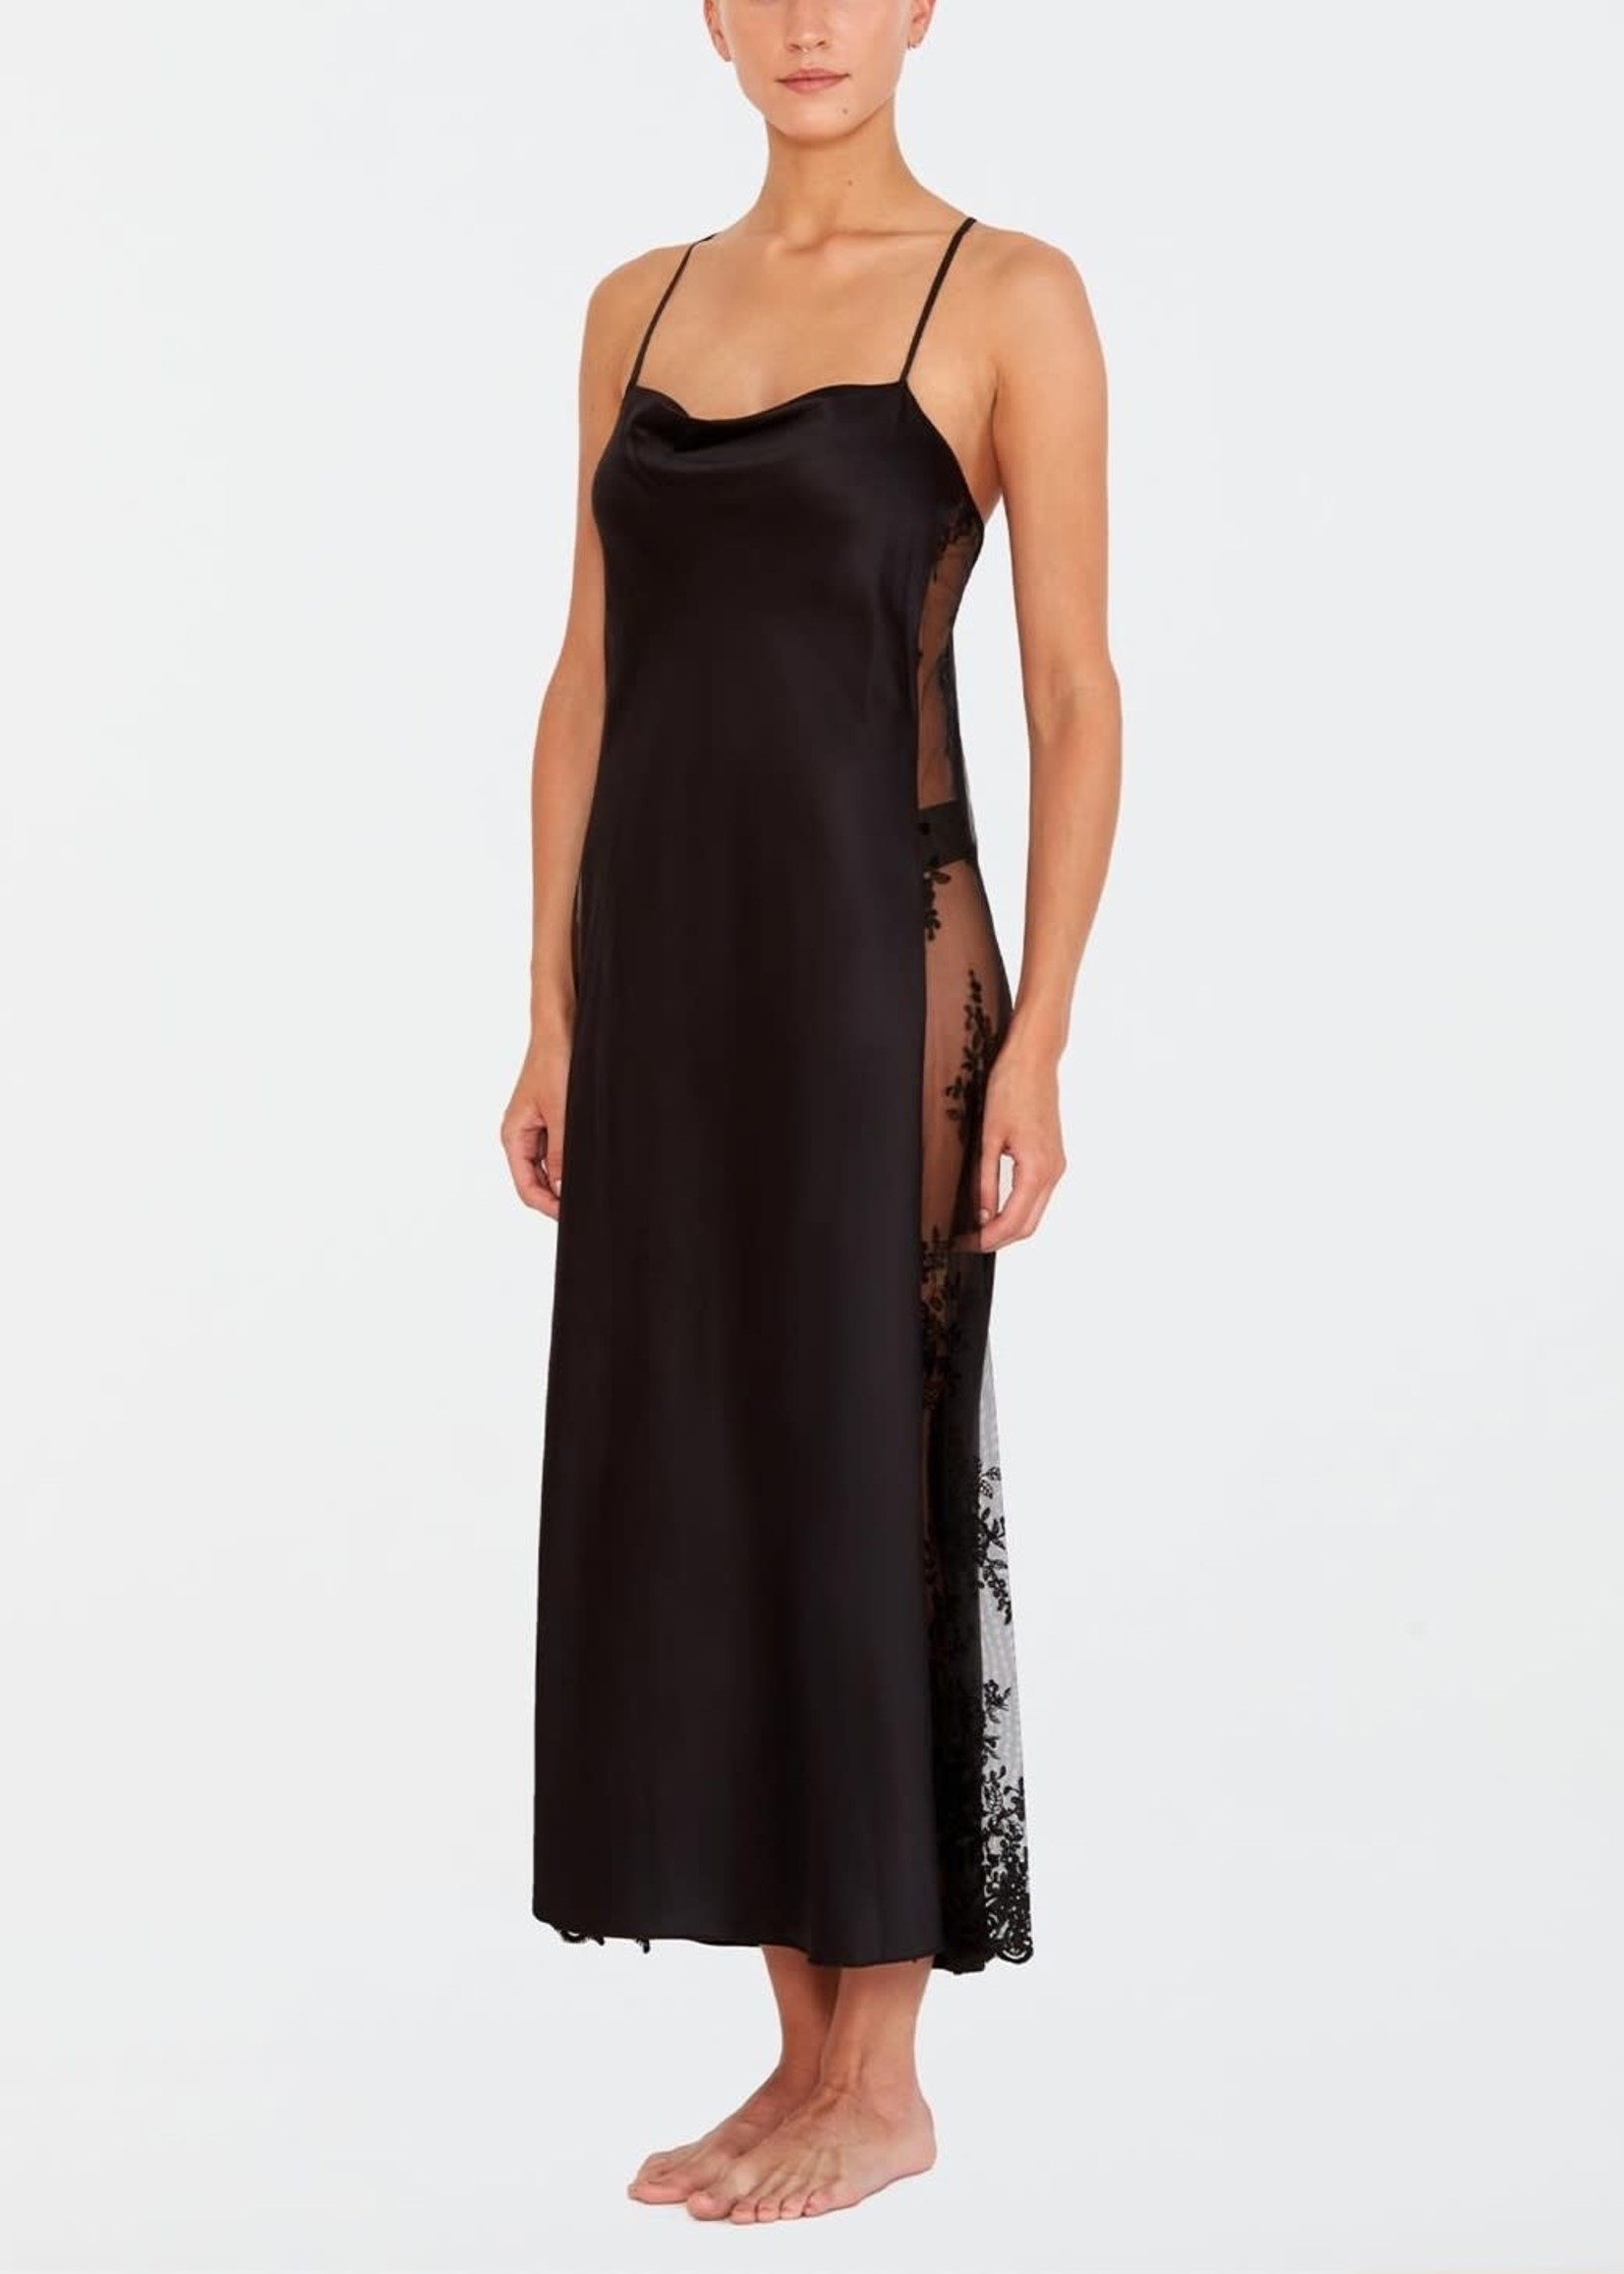 Rya Collection Darling Gown - Black